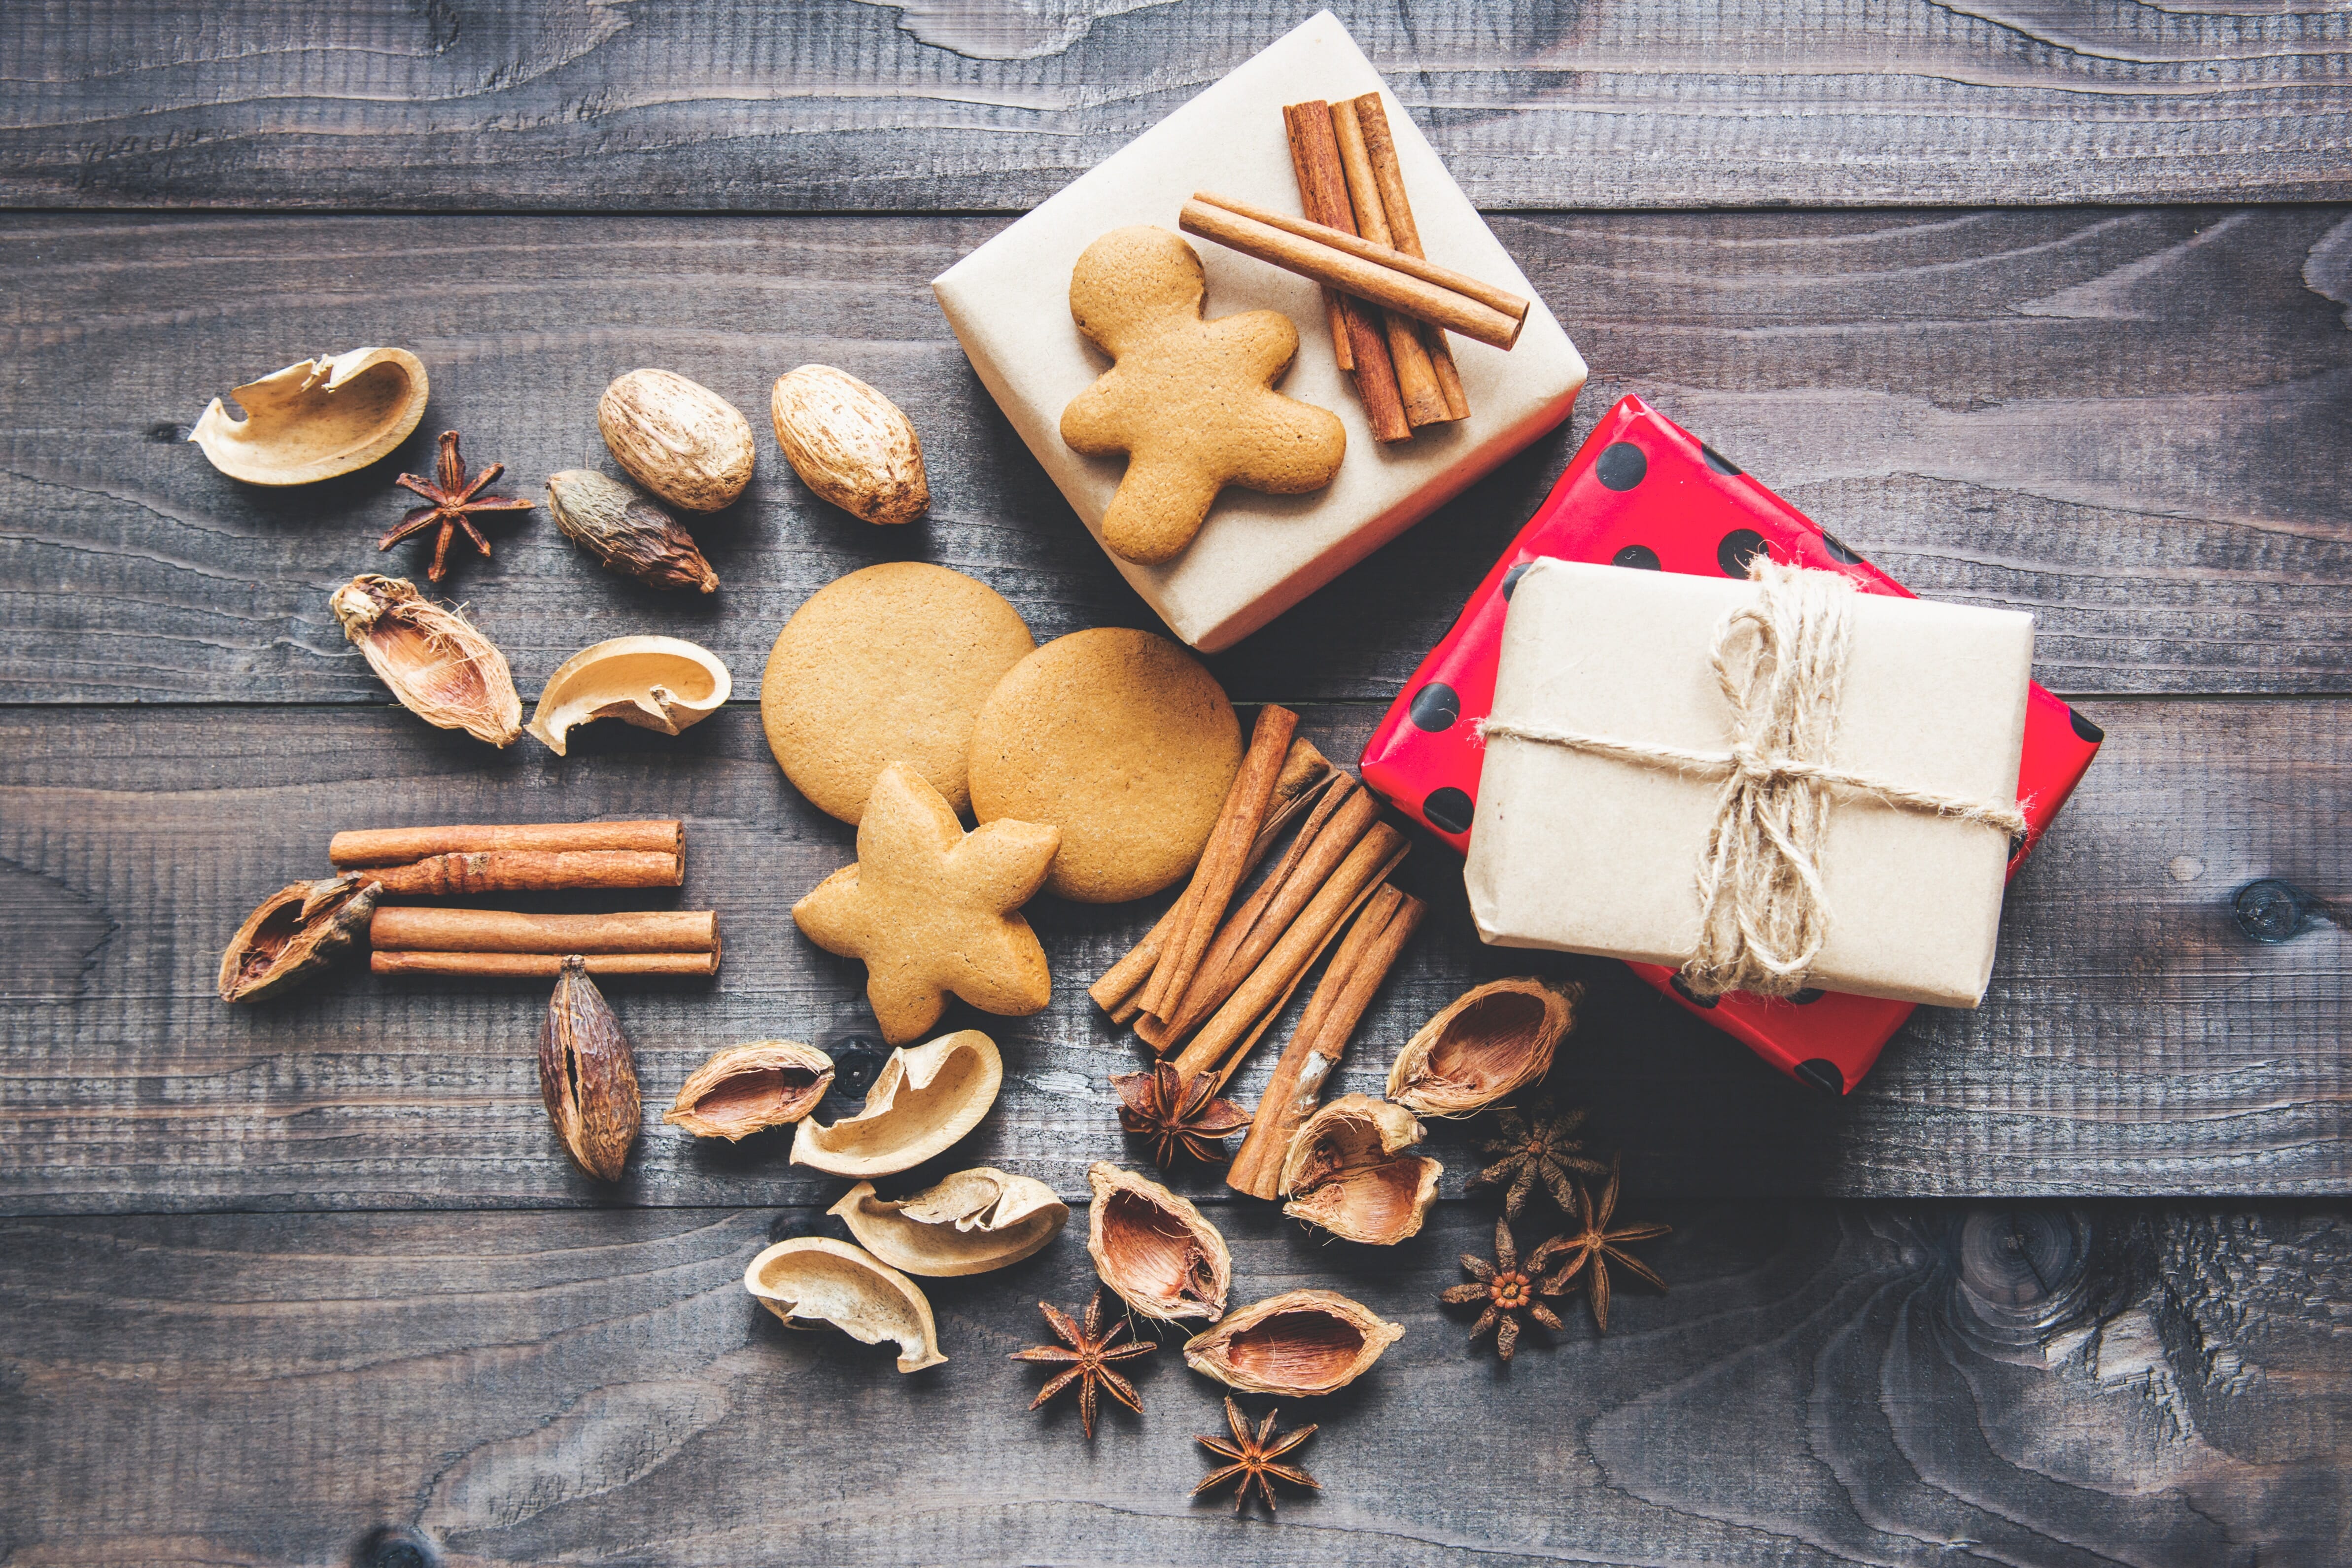 Cookies and Crafts for Pinterest Holiday Trends in 2019